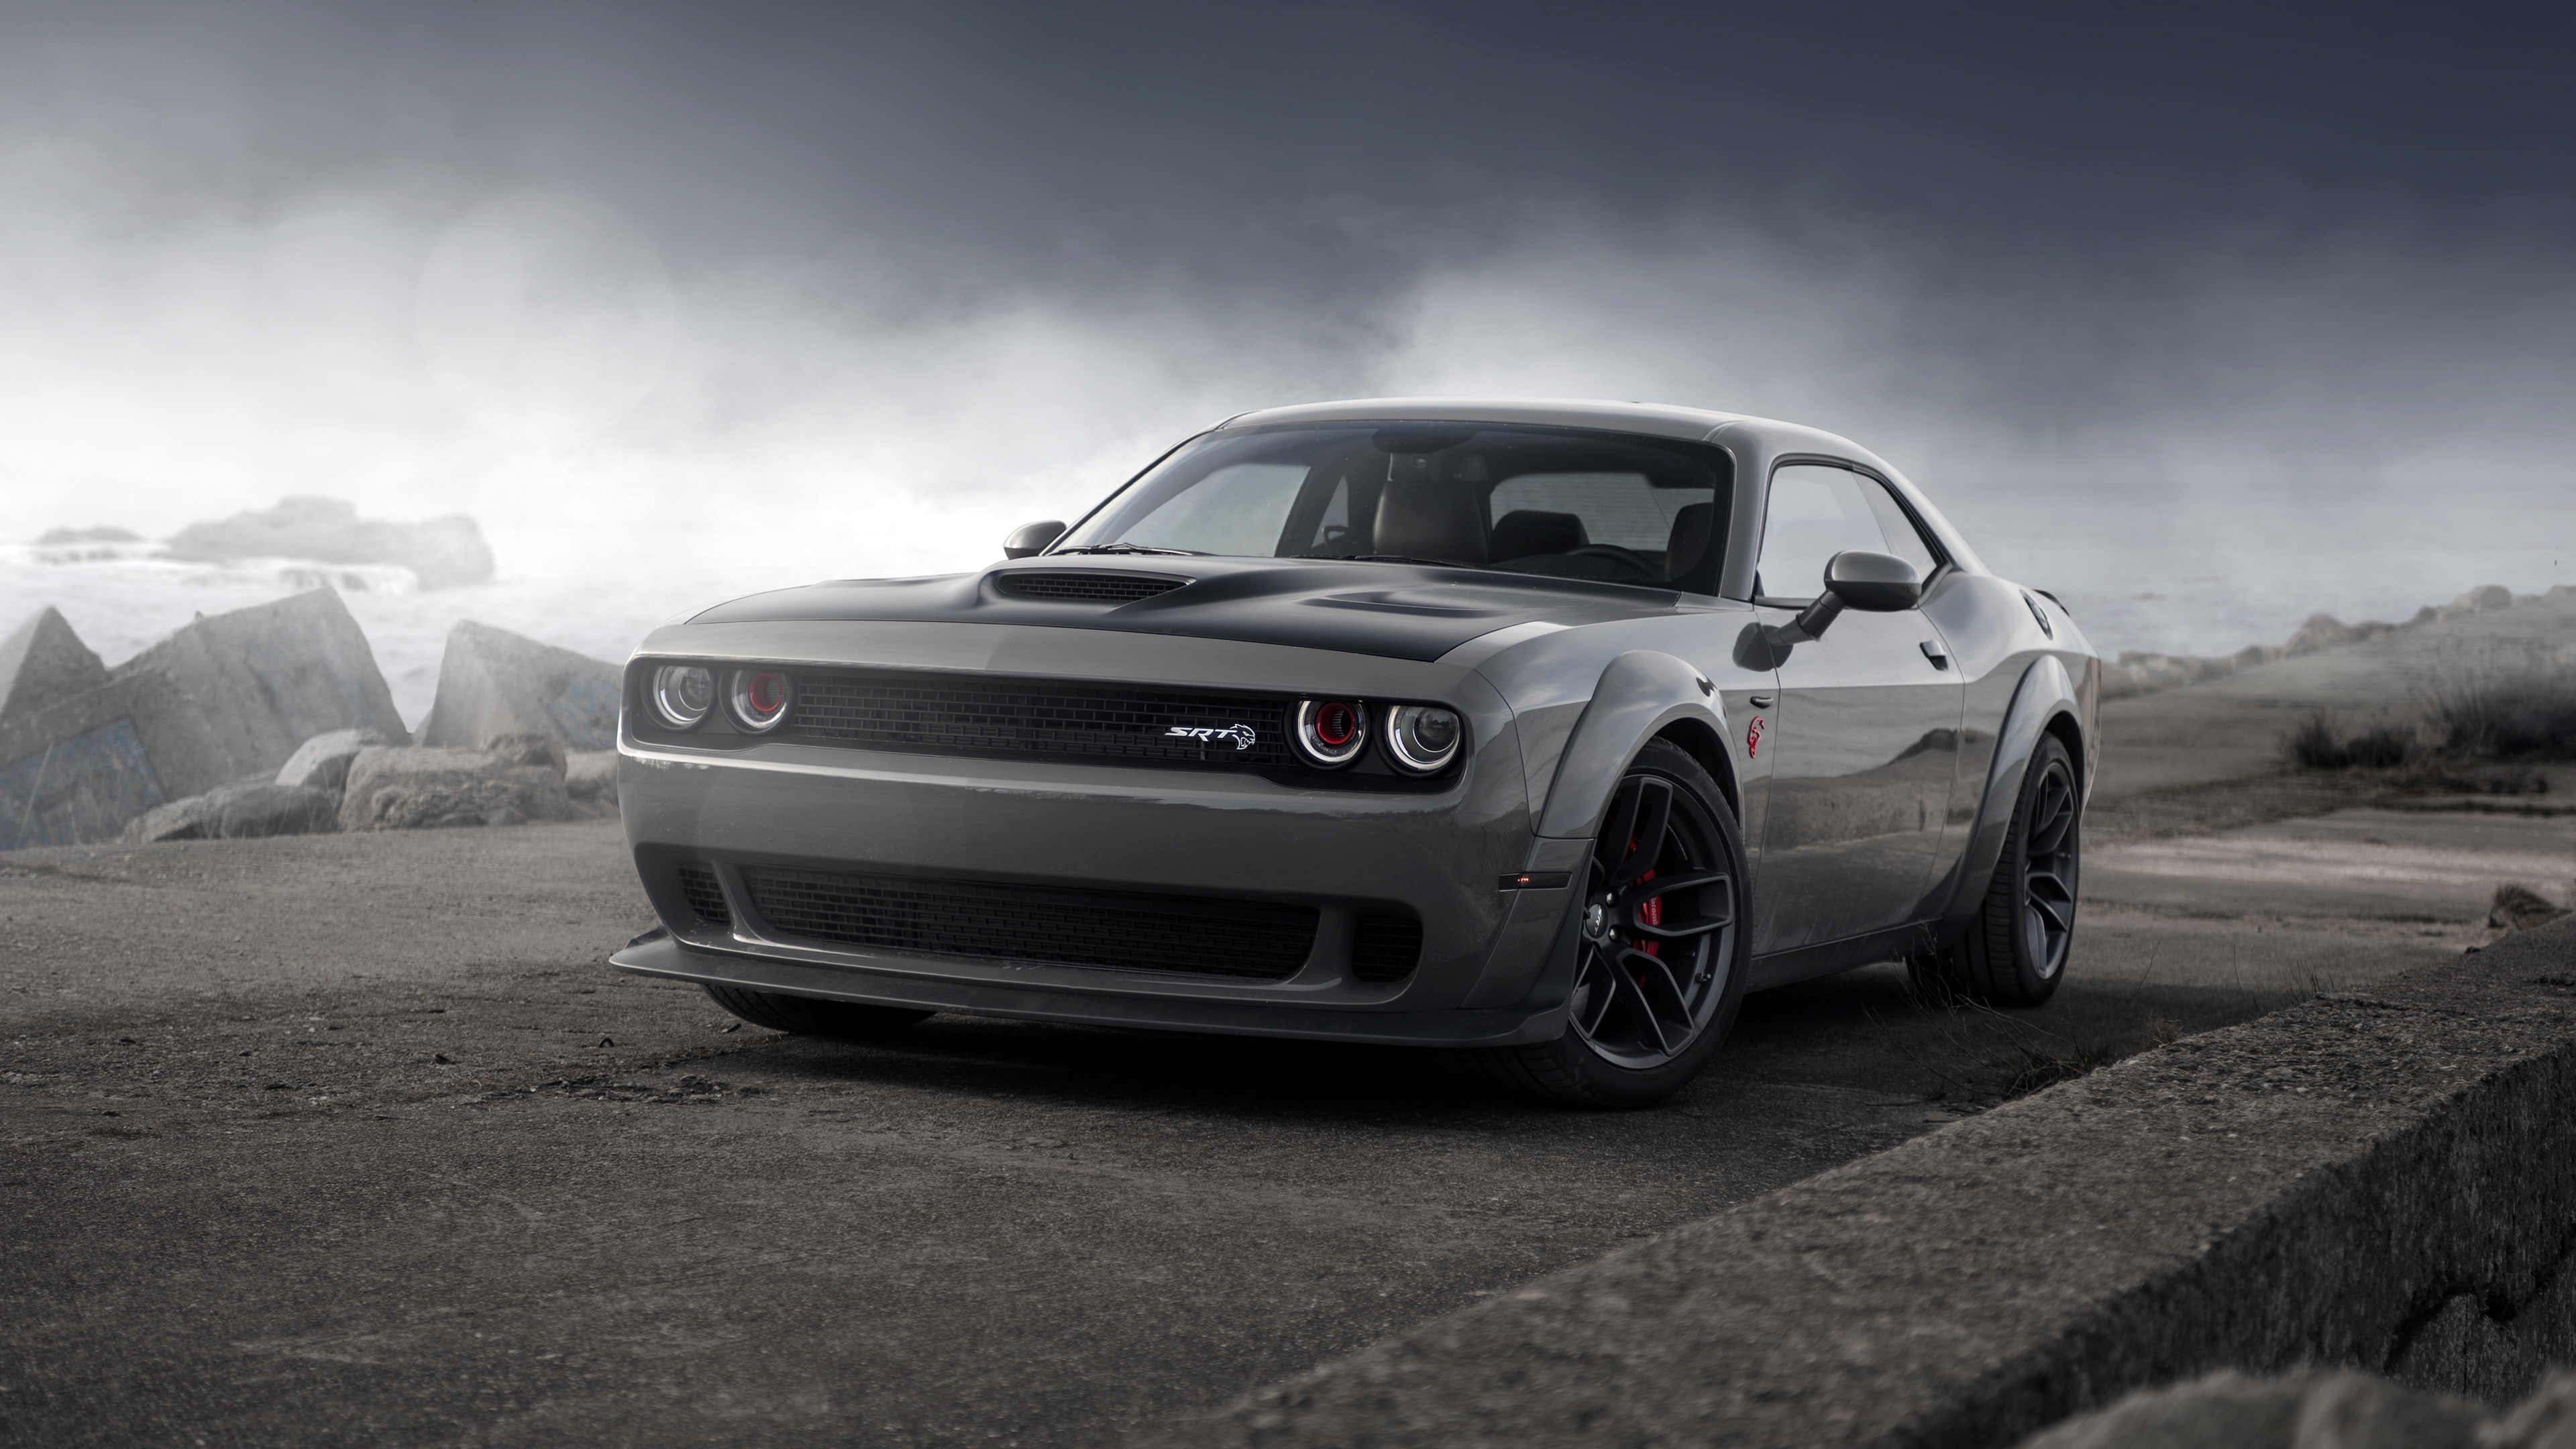 General 3840x2160 car vehicle muscle cars gray cars Dodge Dodge Challenger American cars Stellantis